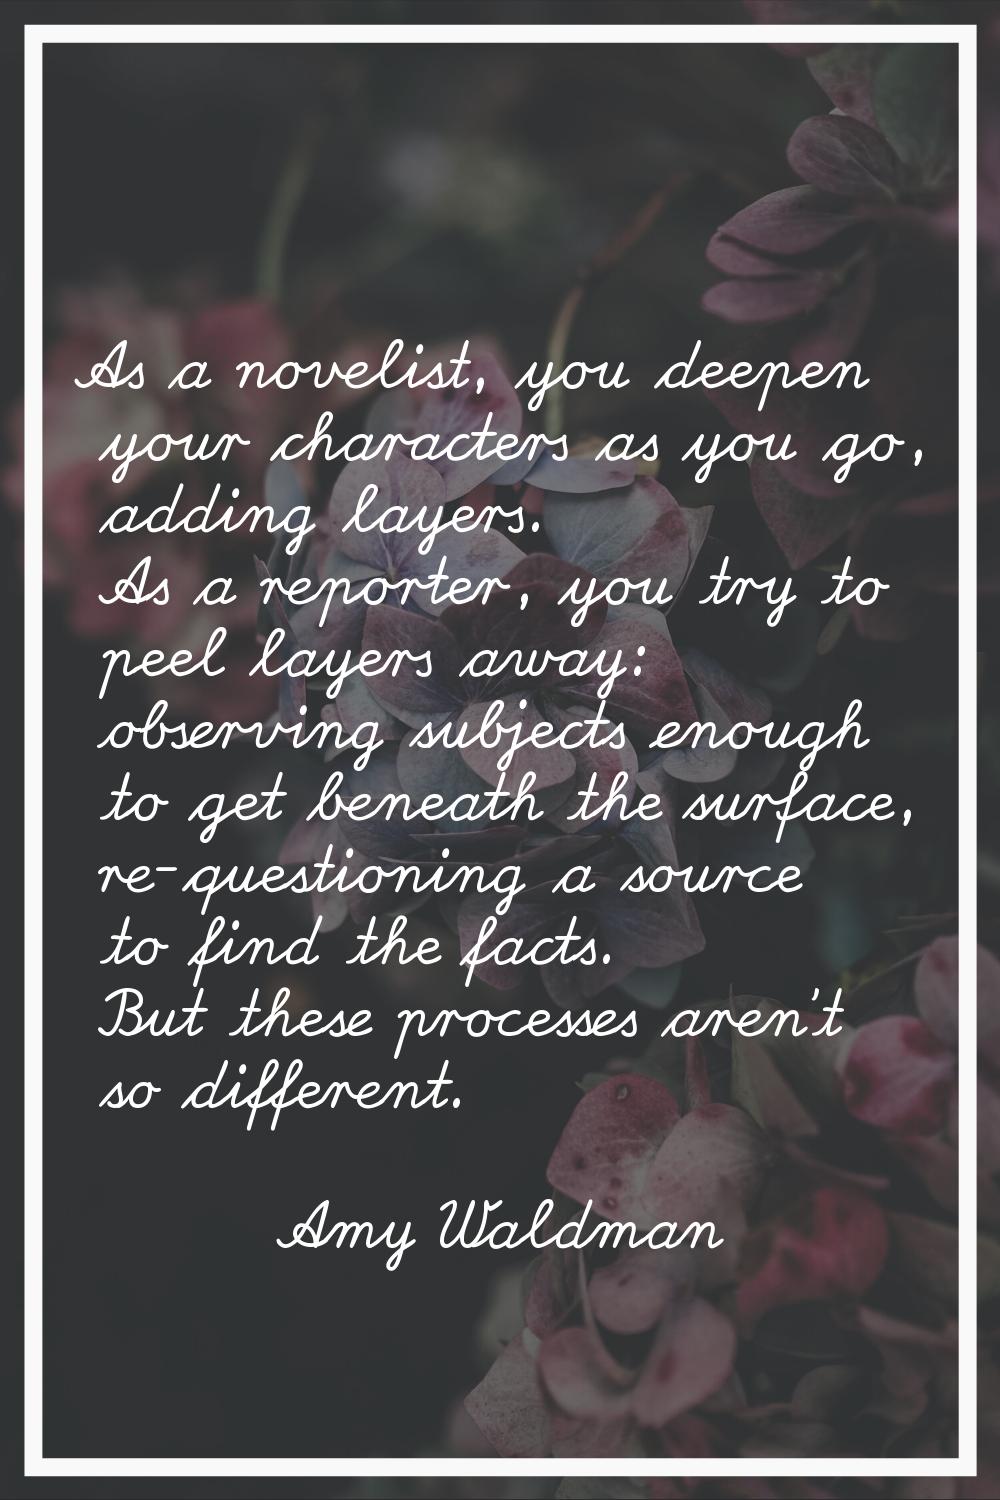 As a novelist, you deepen your characters as you go, adding layers. As a reporter, you try to peel 